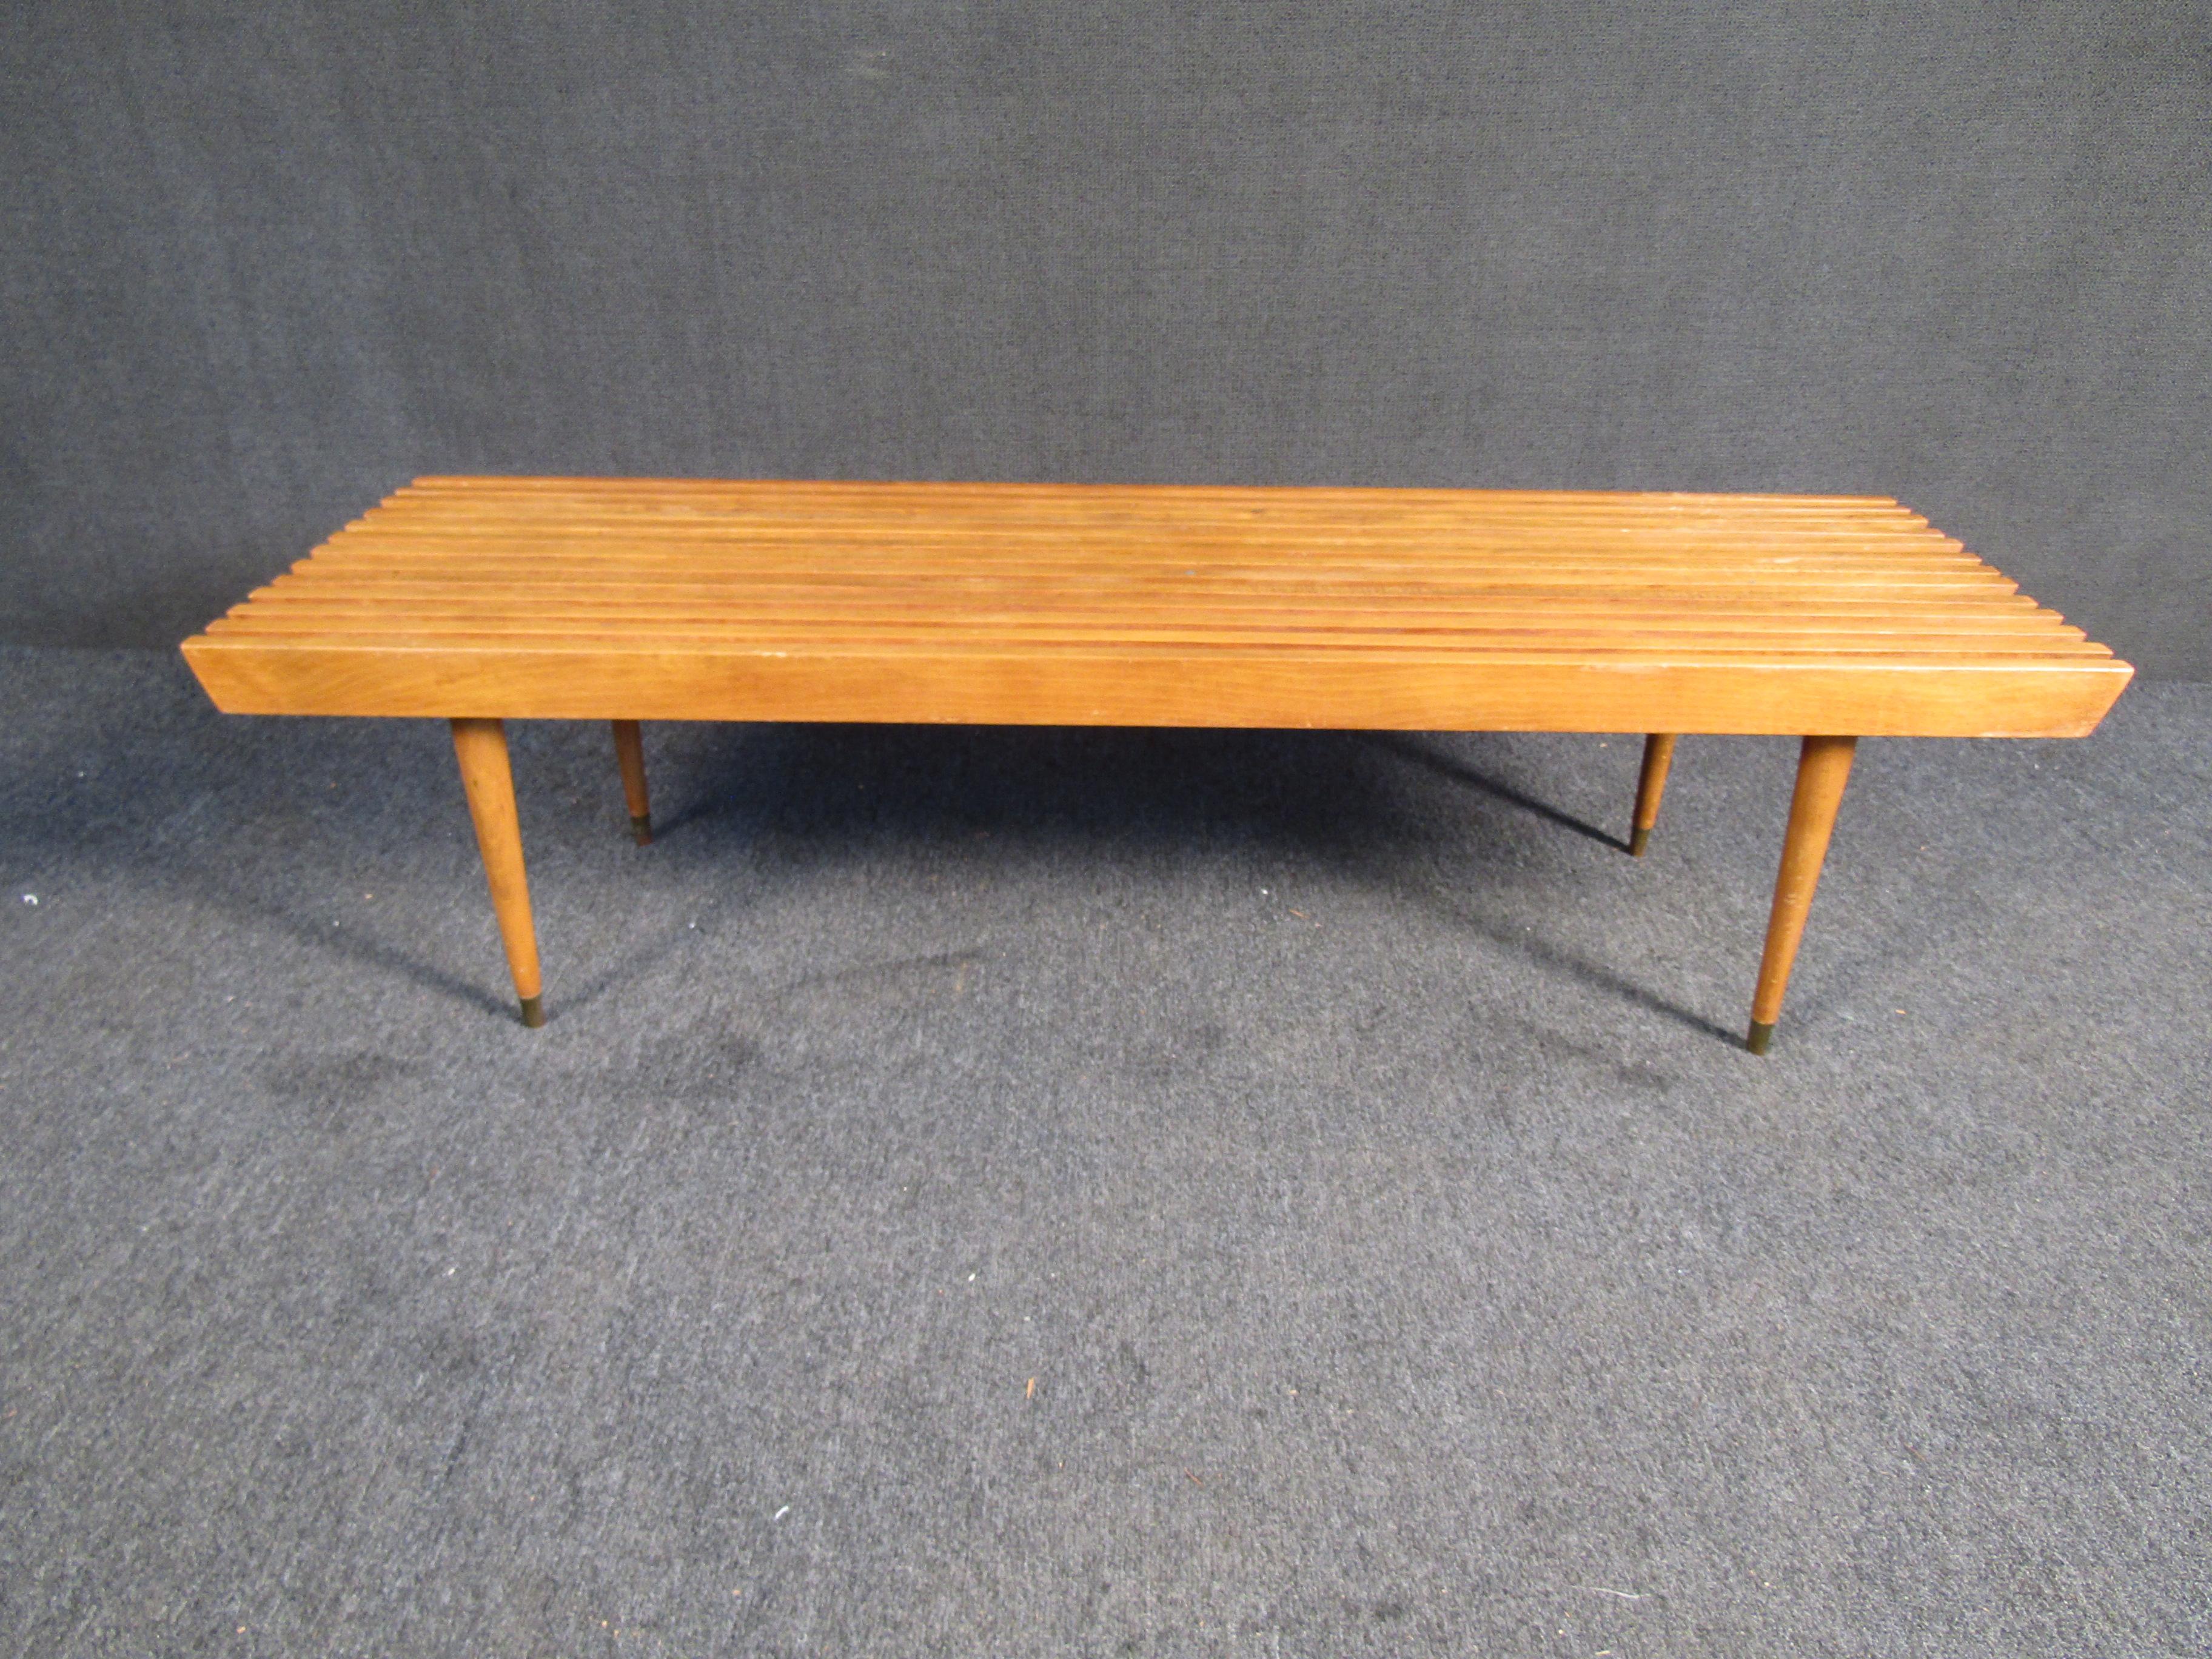 This hardwood slat bench features with tapered legs. Standing at a height of 16 inches, this vintage modern slat bench makes the perfect piece for occasional seating or even as a tall coffee table. 

Please confirm item location (NY or NJ).